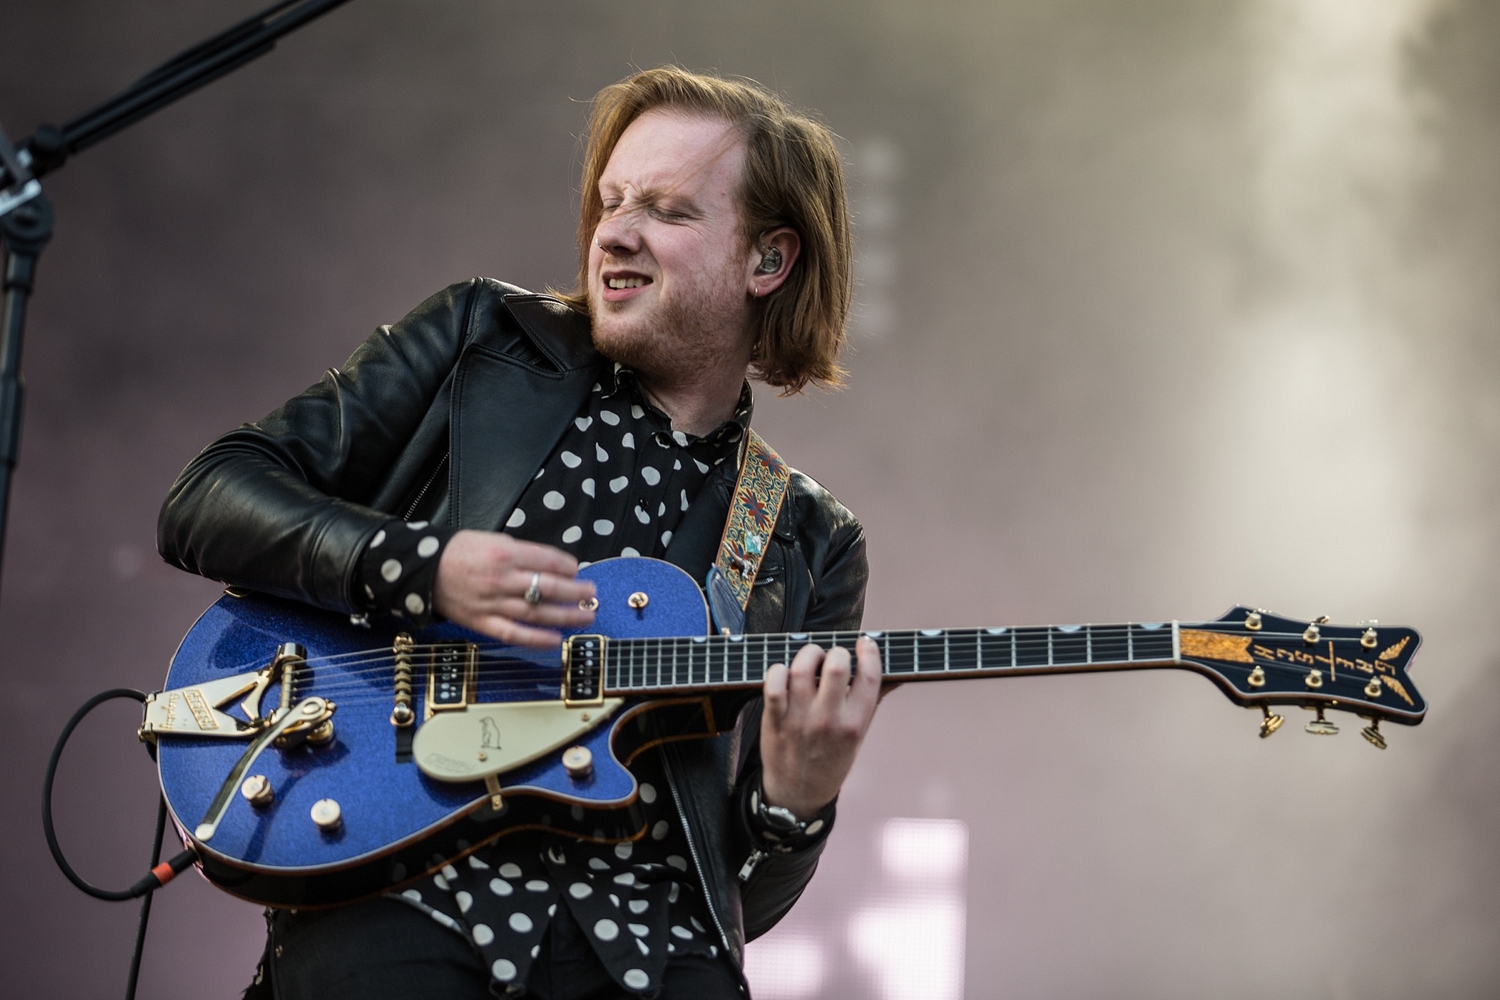 Two Door Cinema Club say their new album “won’t be exclusive to any streaming service”